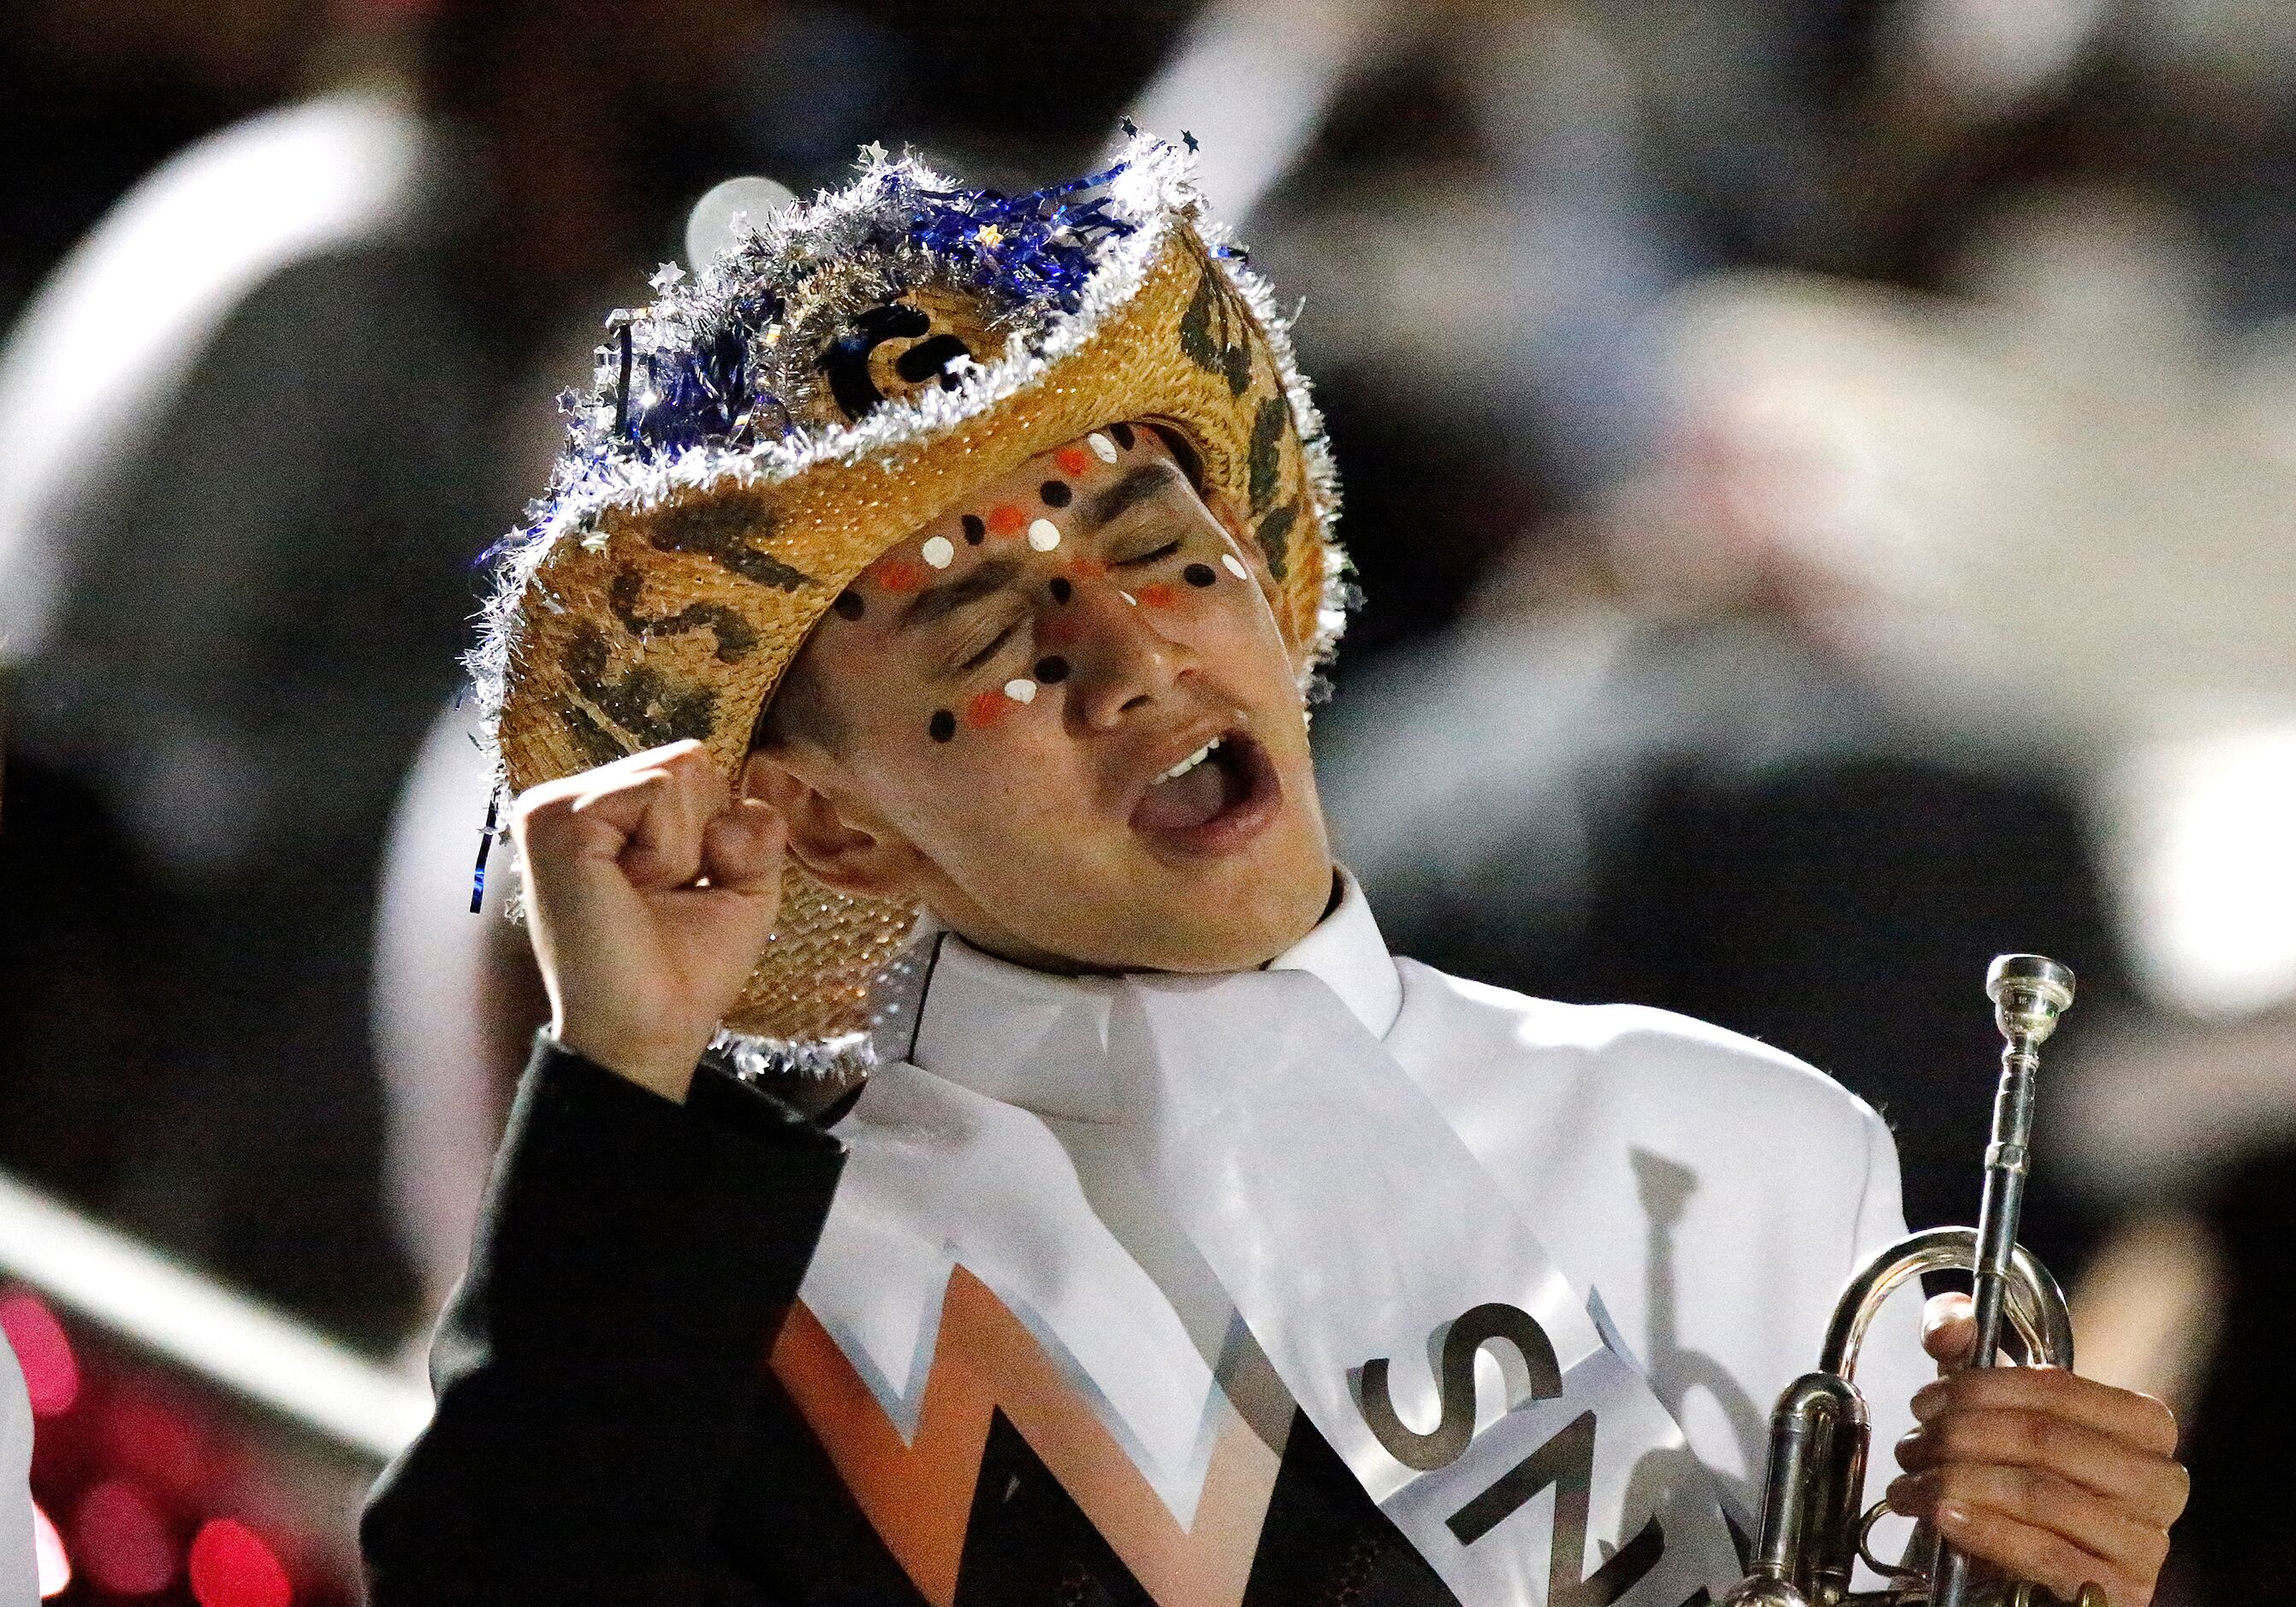 West Mesquite marching band member Gio Lumas, 17, holds his trumpet while cheering his team...